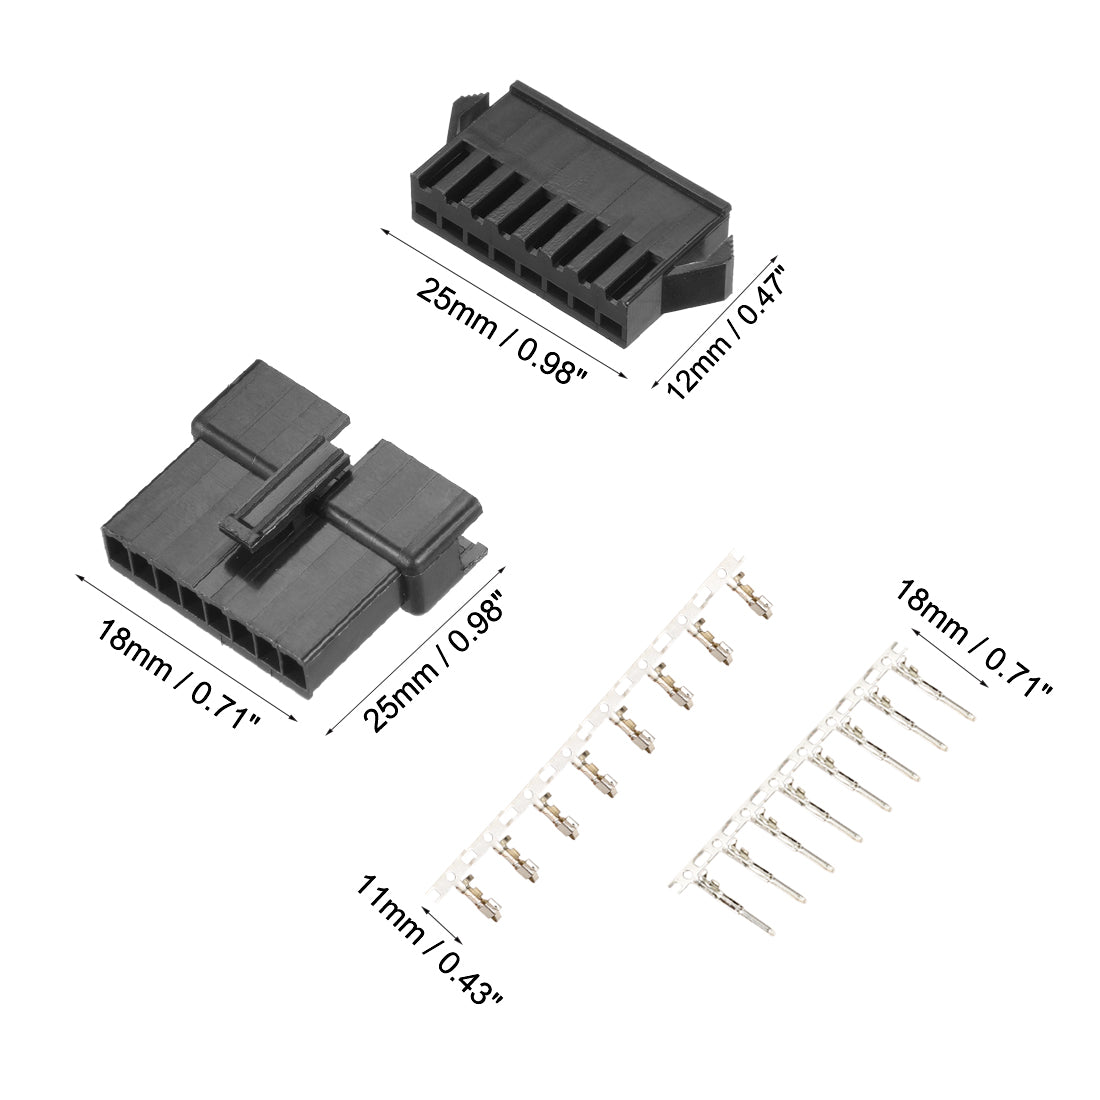 uxcell Uxcell 10 Pairs 2.5mm 8 Pin Black Plastic Male Female -SM Housing Crimp Terminal Connector